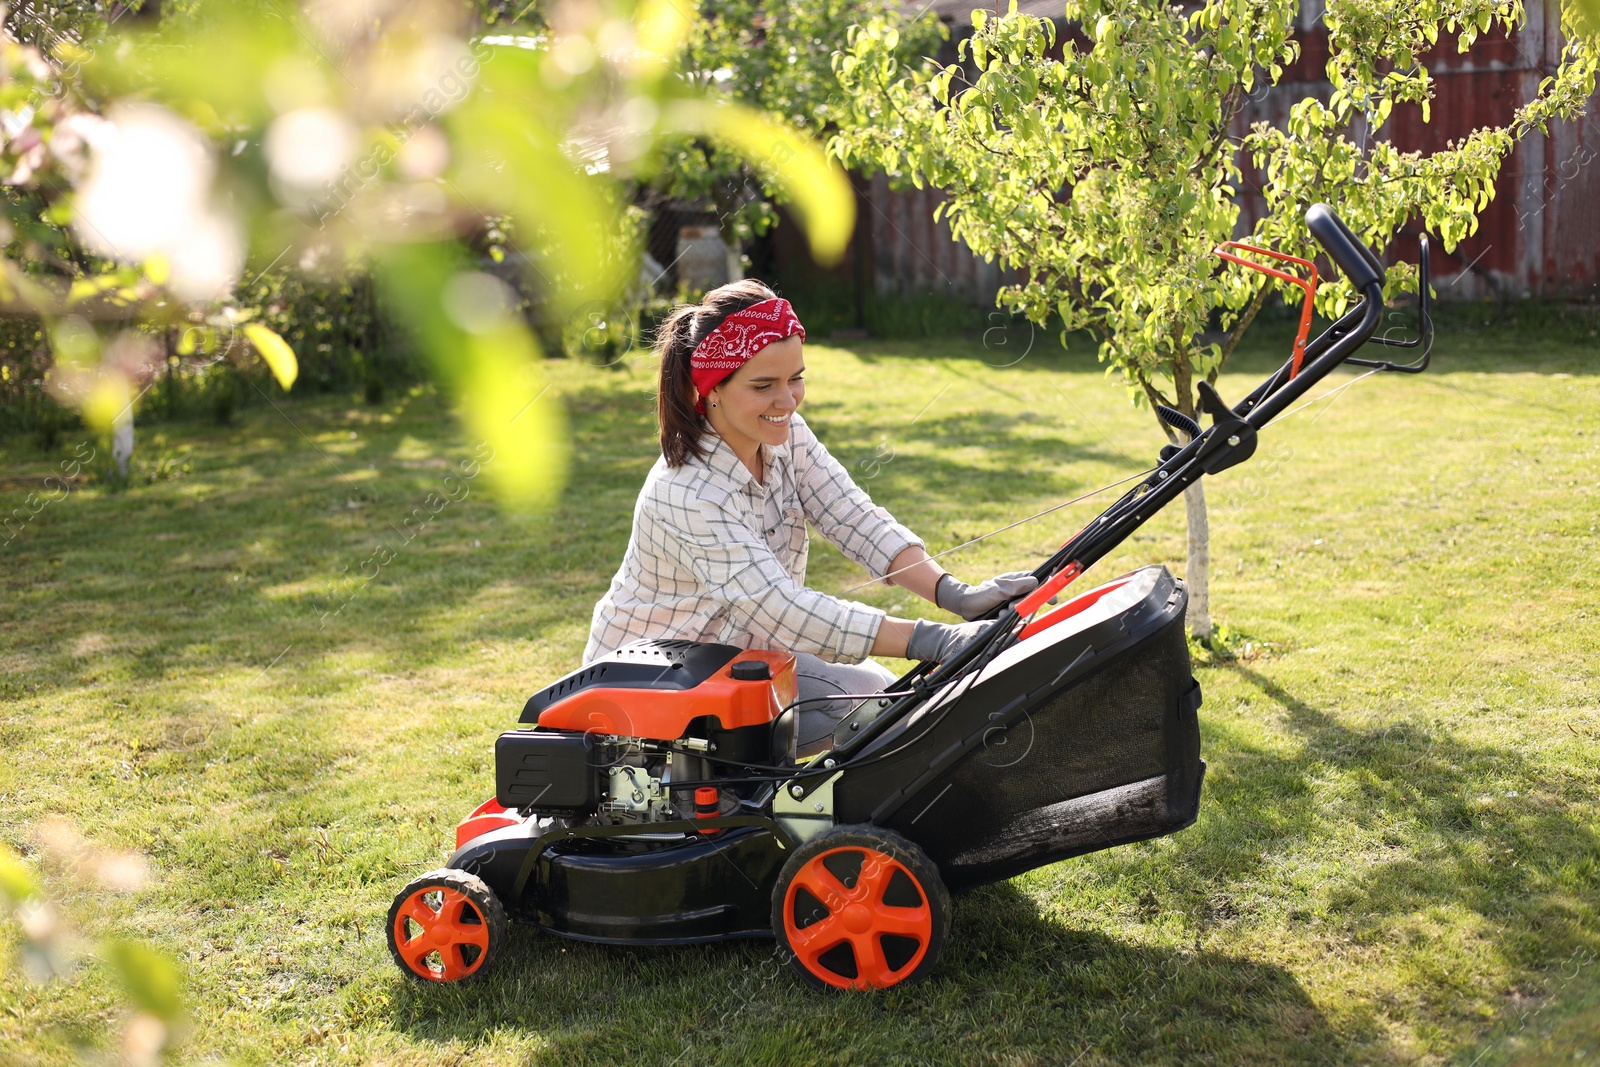 Photo of Smiling woman with lawn mower in garden on sunny day